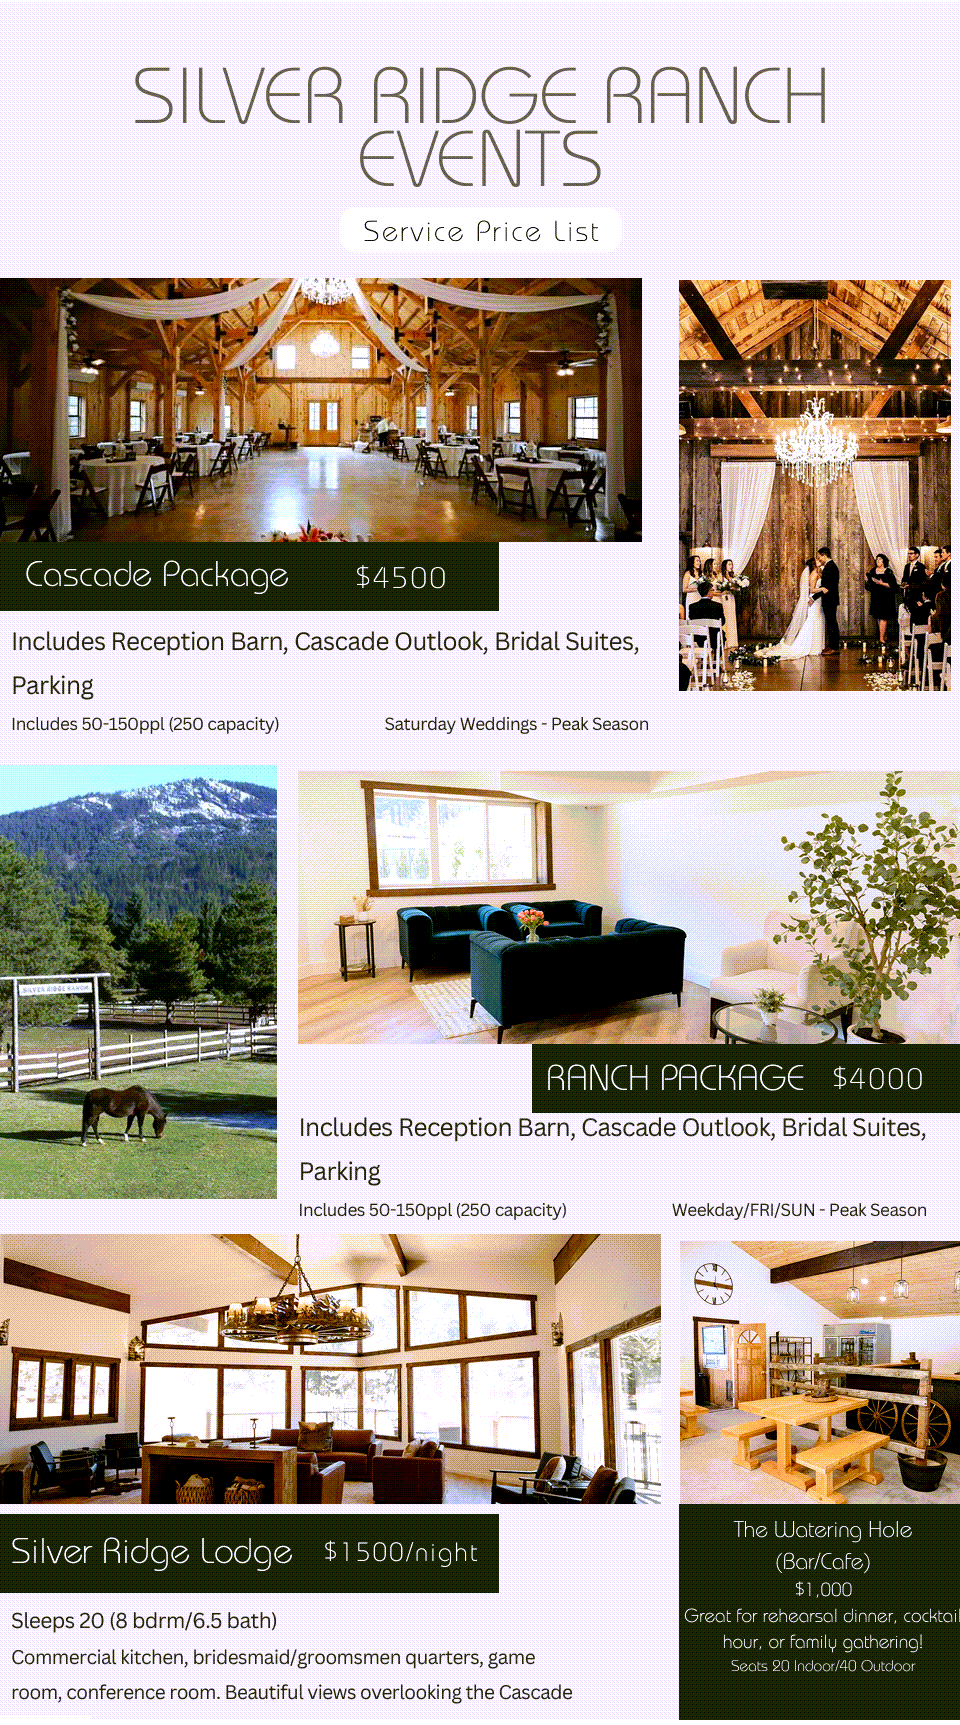 Wedding Packages ranging from $1,000 to $4,500 are available at Silver Ridge Ranch.